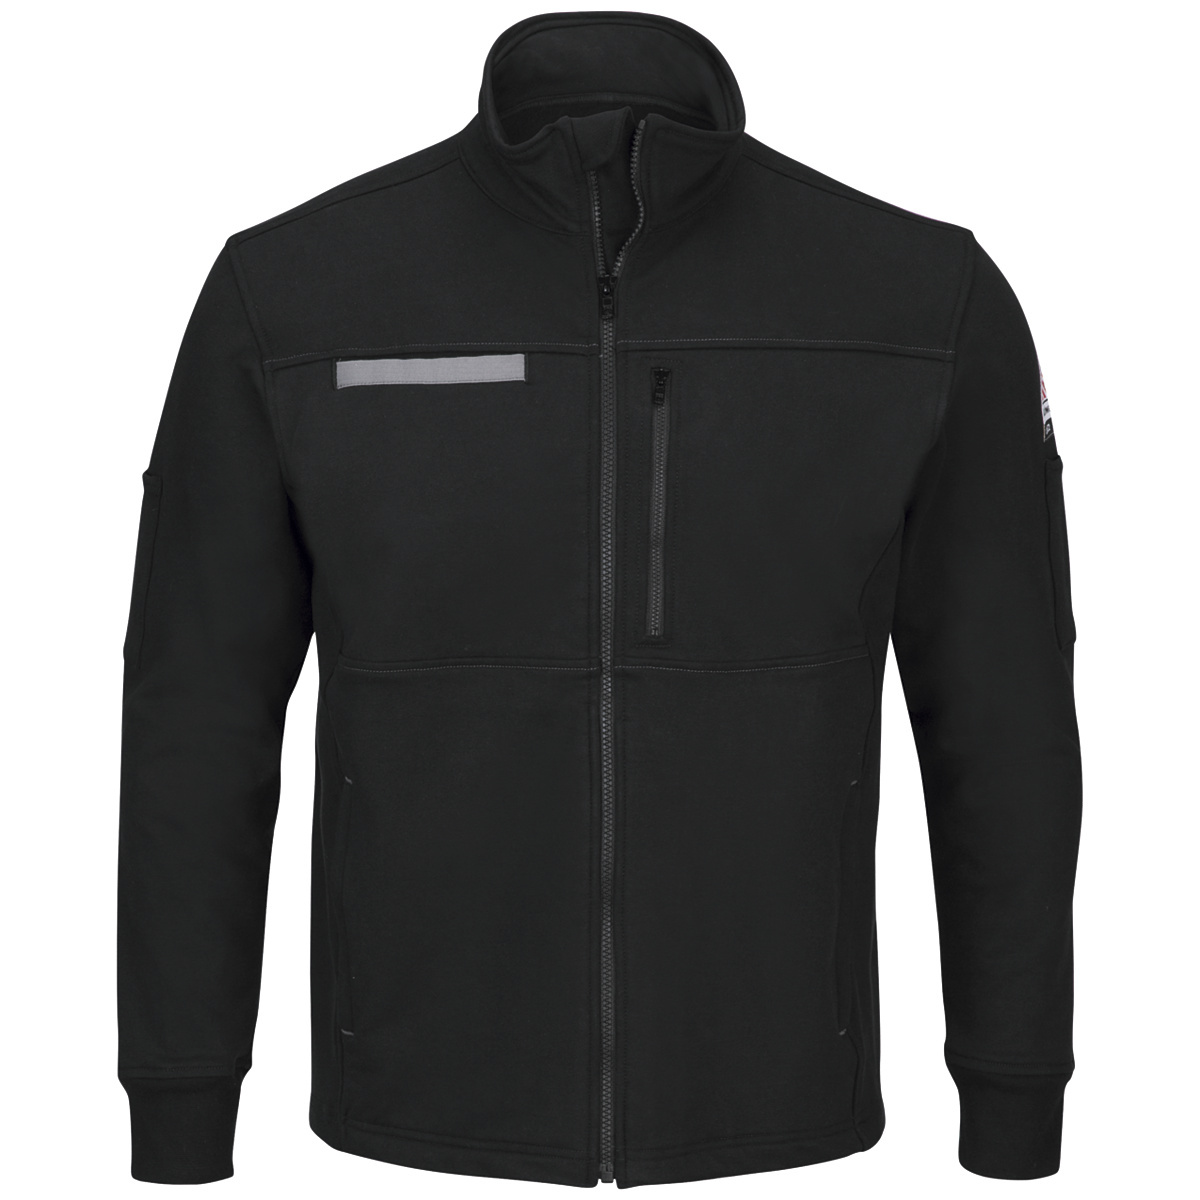 Bulwark® 2X Tall Black Cotton/Spandex Flame Resistant Jacket With Zipper Front Closure